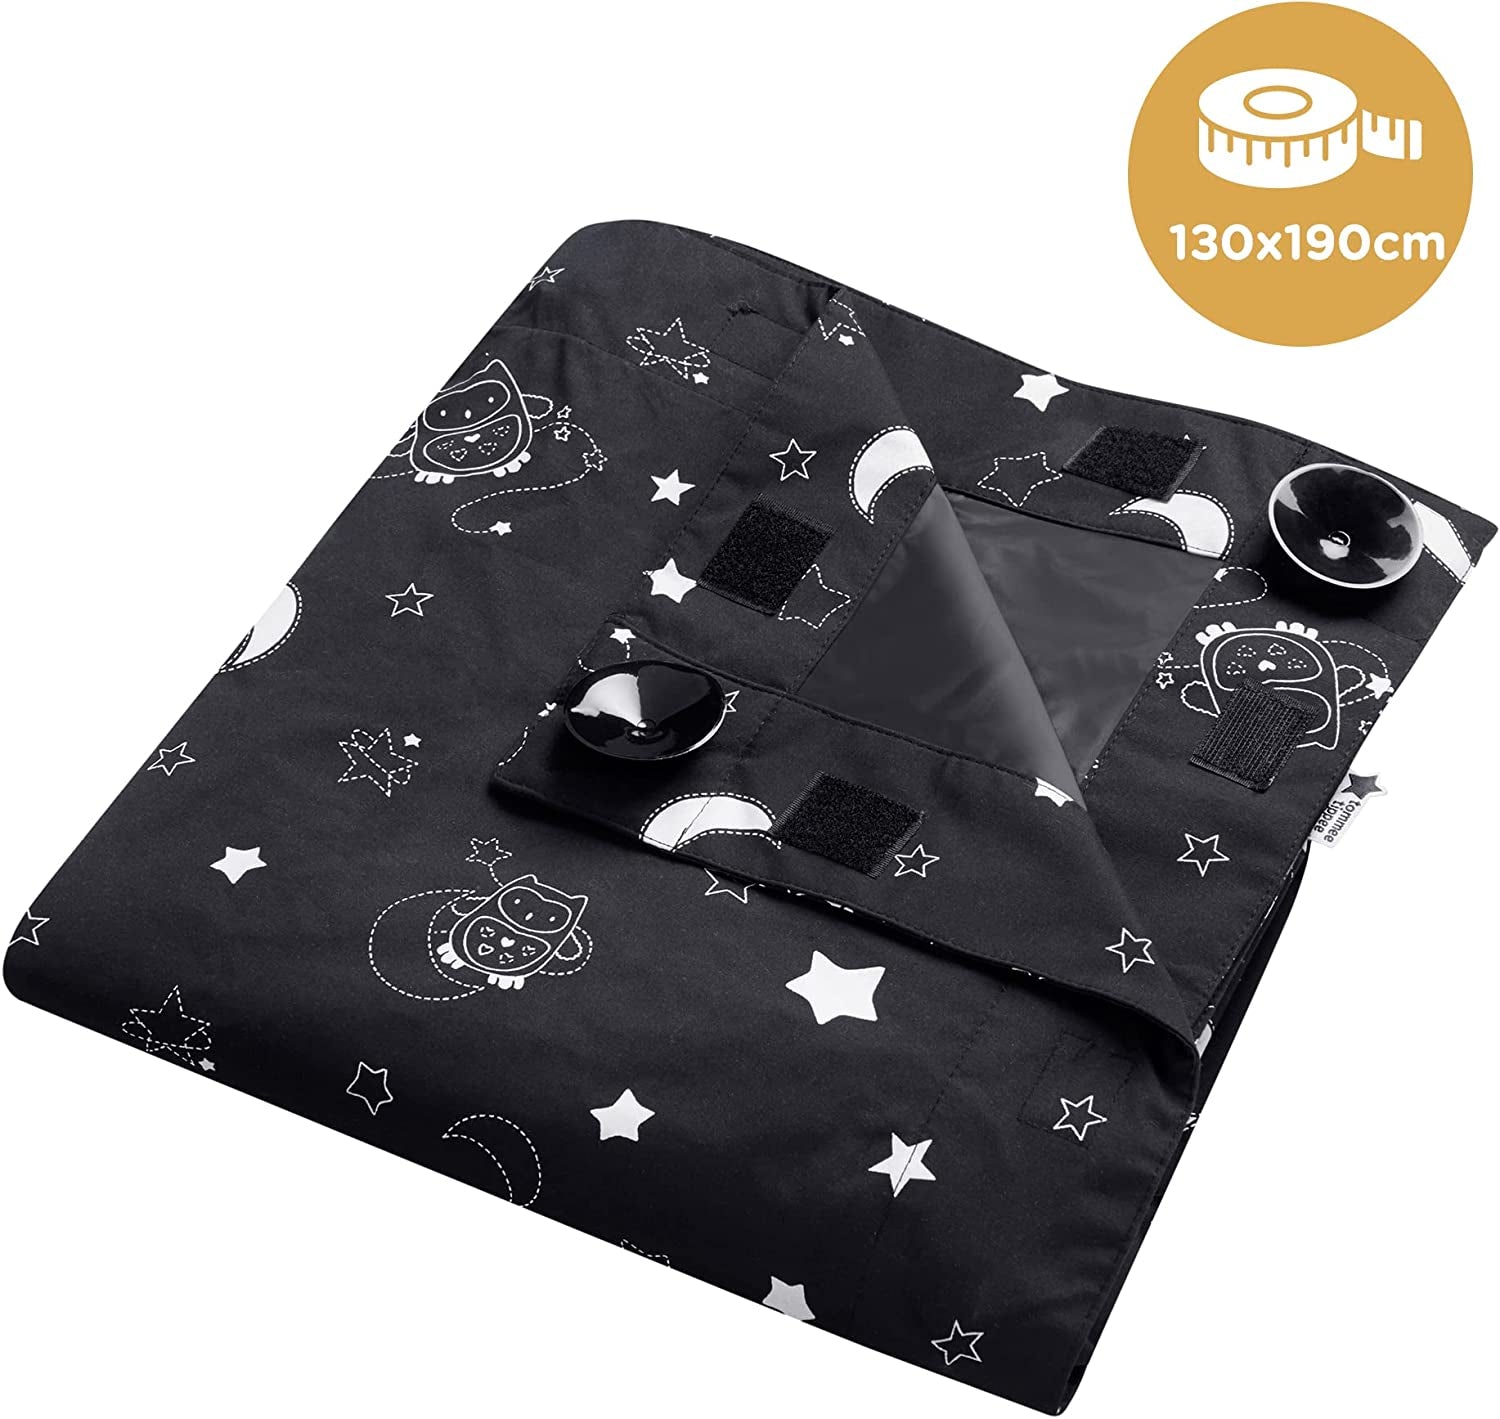 Sleeptime Portable Blackout Blind with Suction Cups, Adjustable and Lightweight, Large, 130 X 198Cm